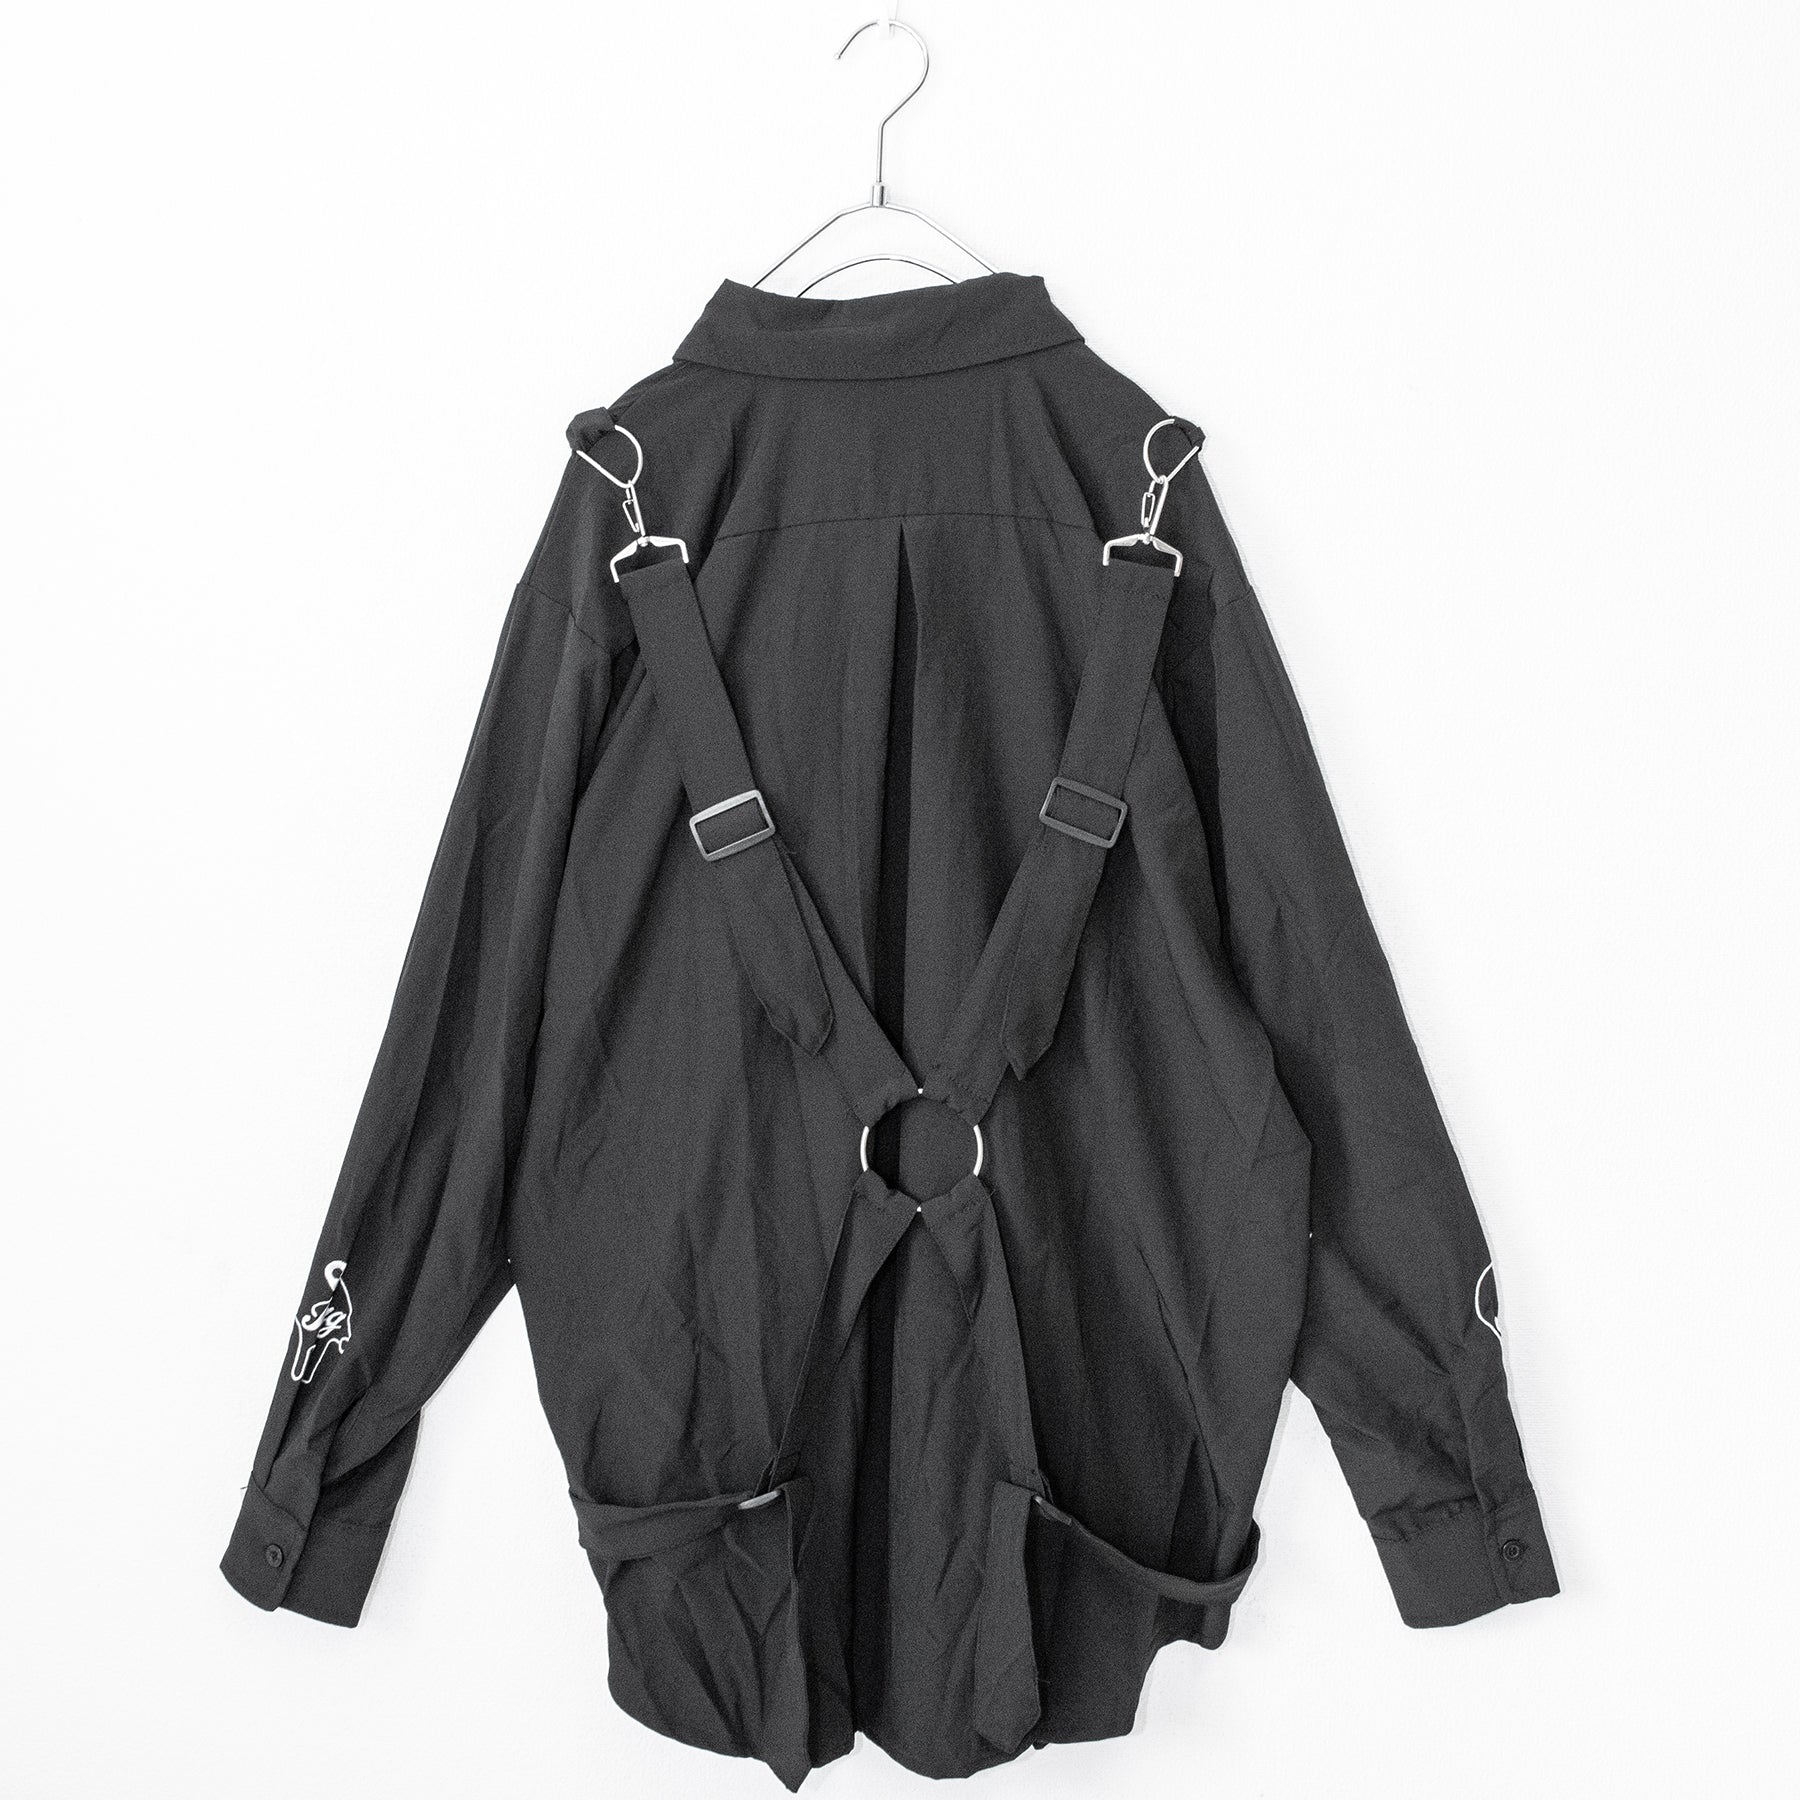 ACDC RAG Drip Parachute Harness L/S Shirt Black - YOUAREMYPOISON